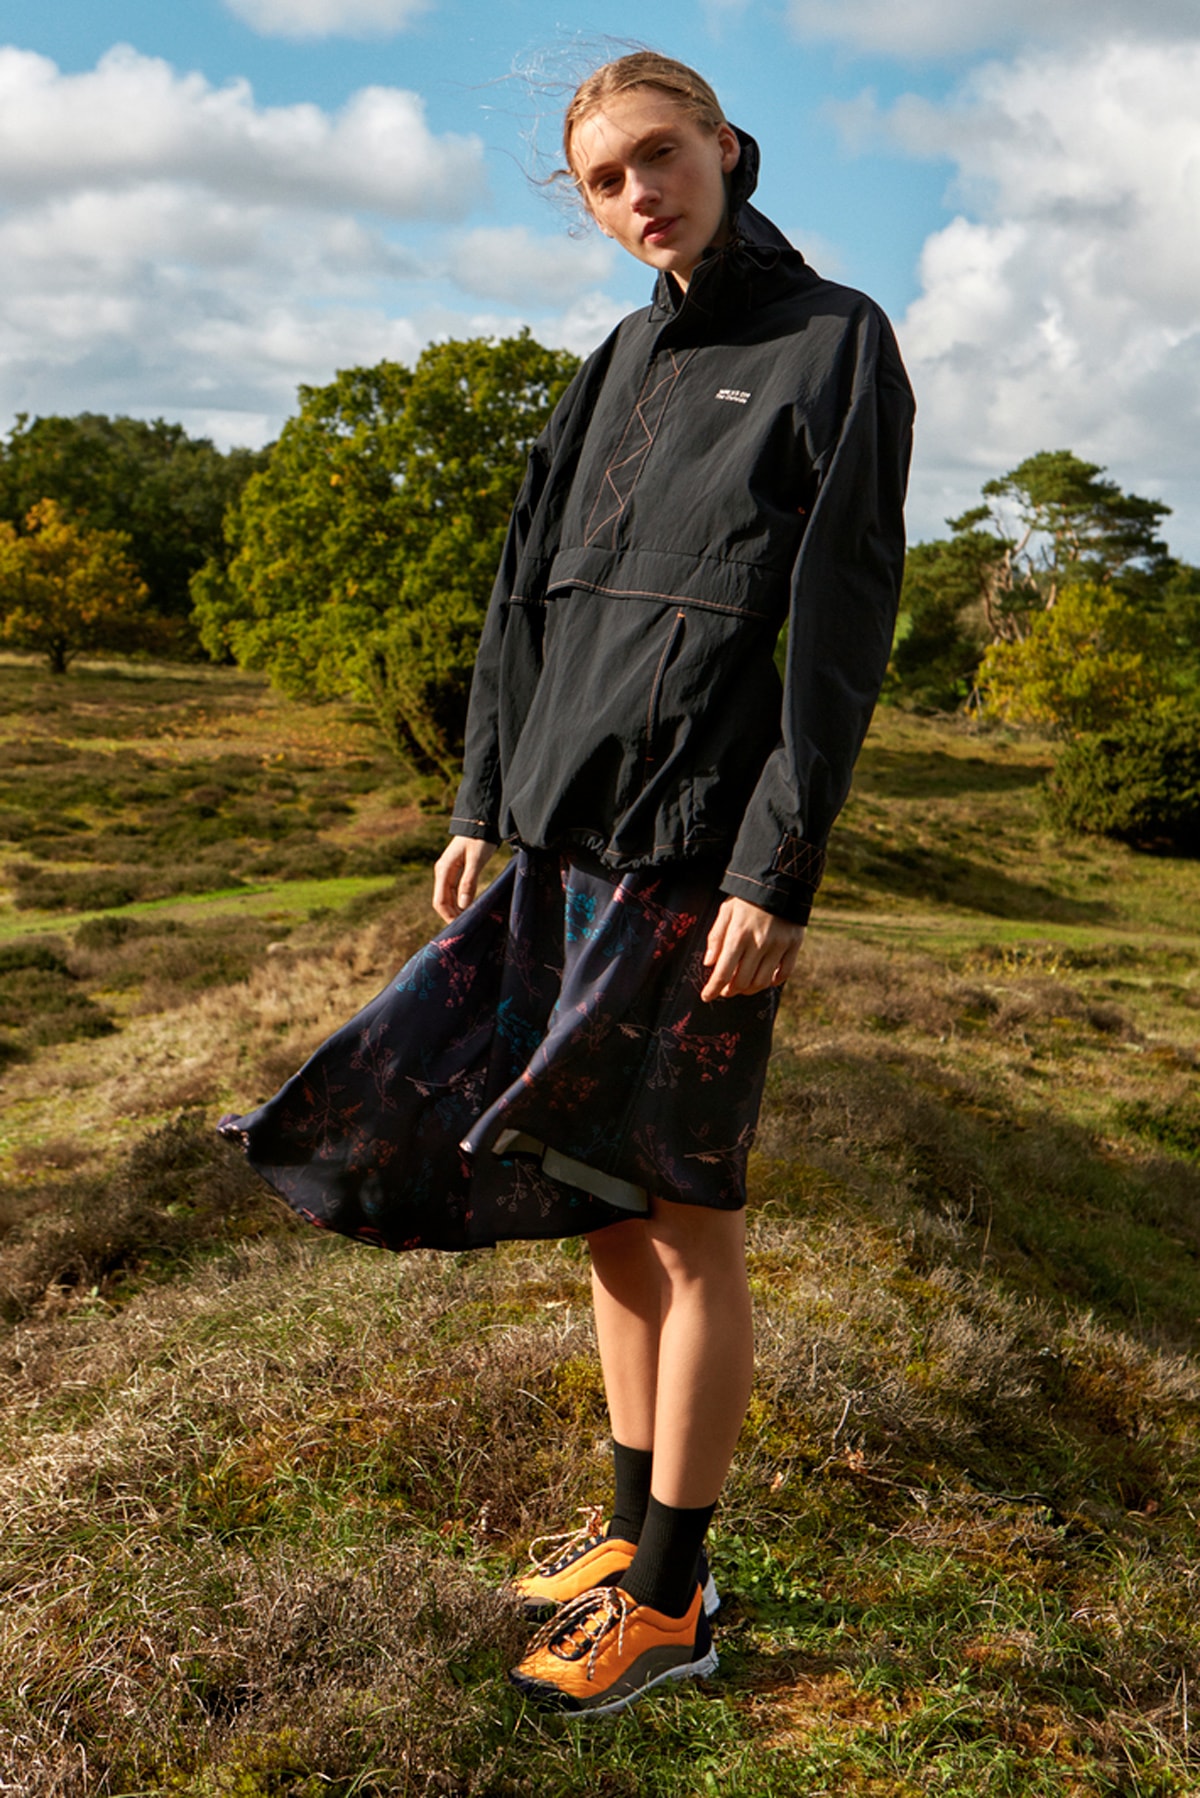 Wood Wood Spring Summer 2019 Outside Collection Lookbook Sporty Technical Jacket Skirt